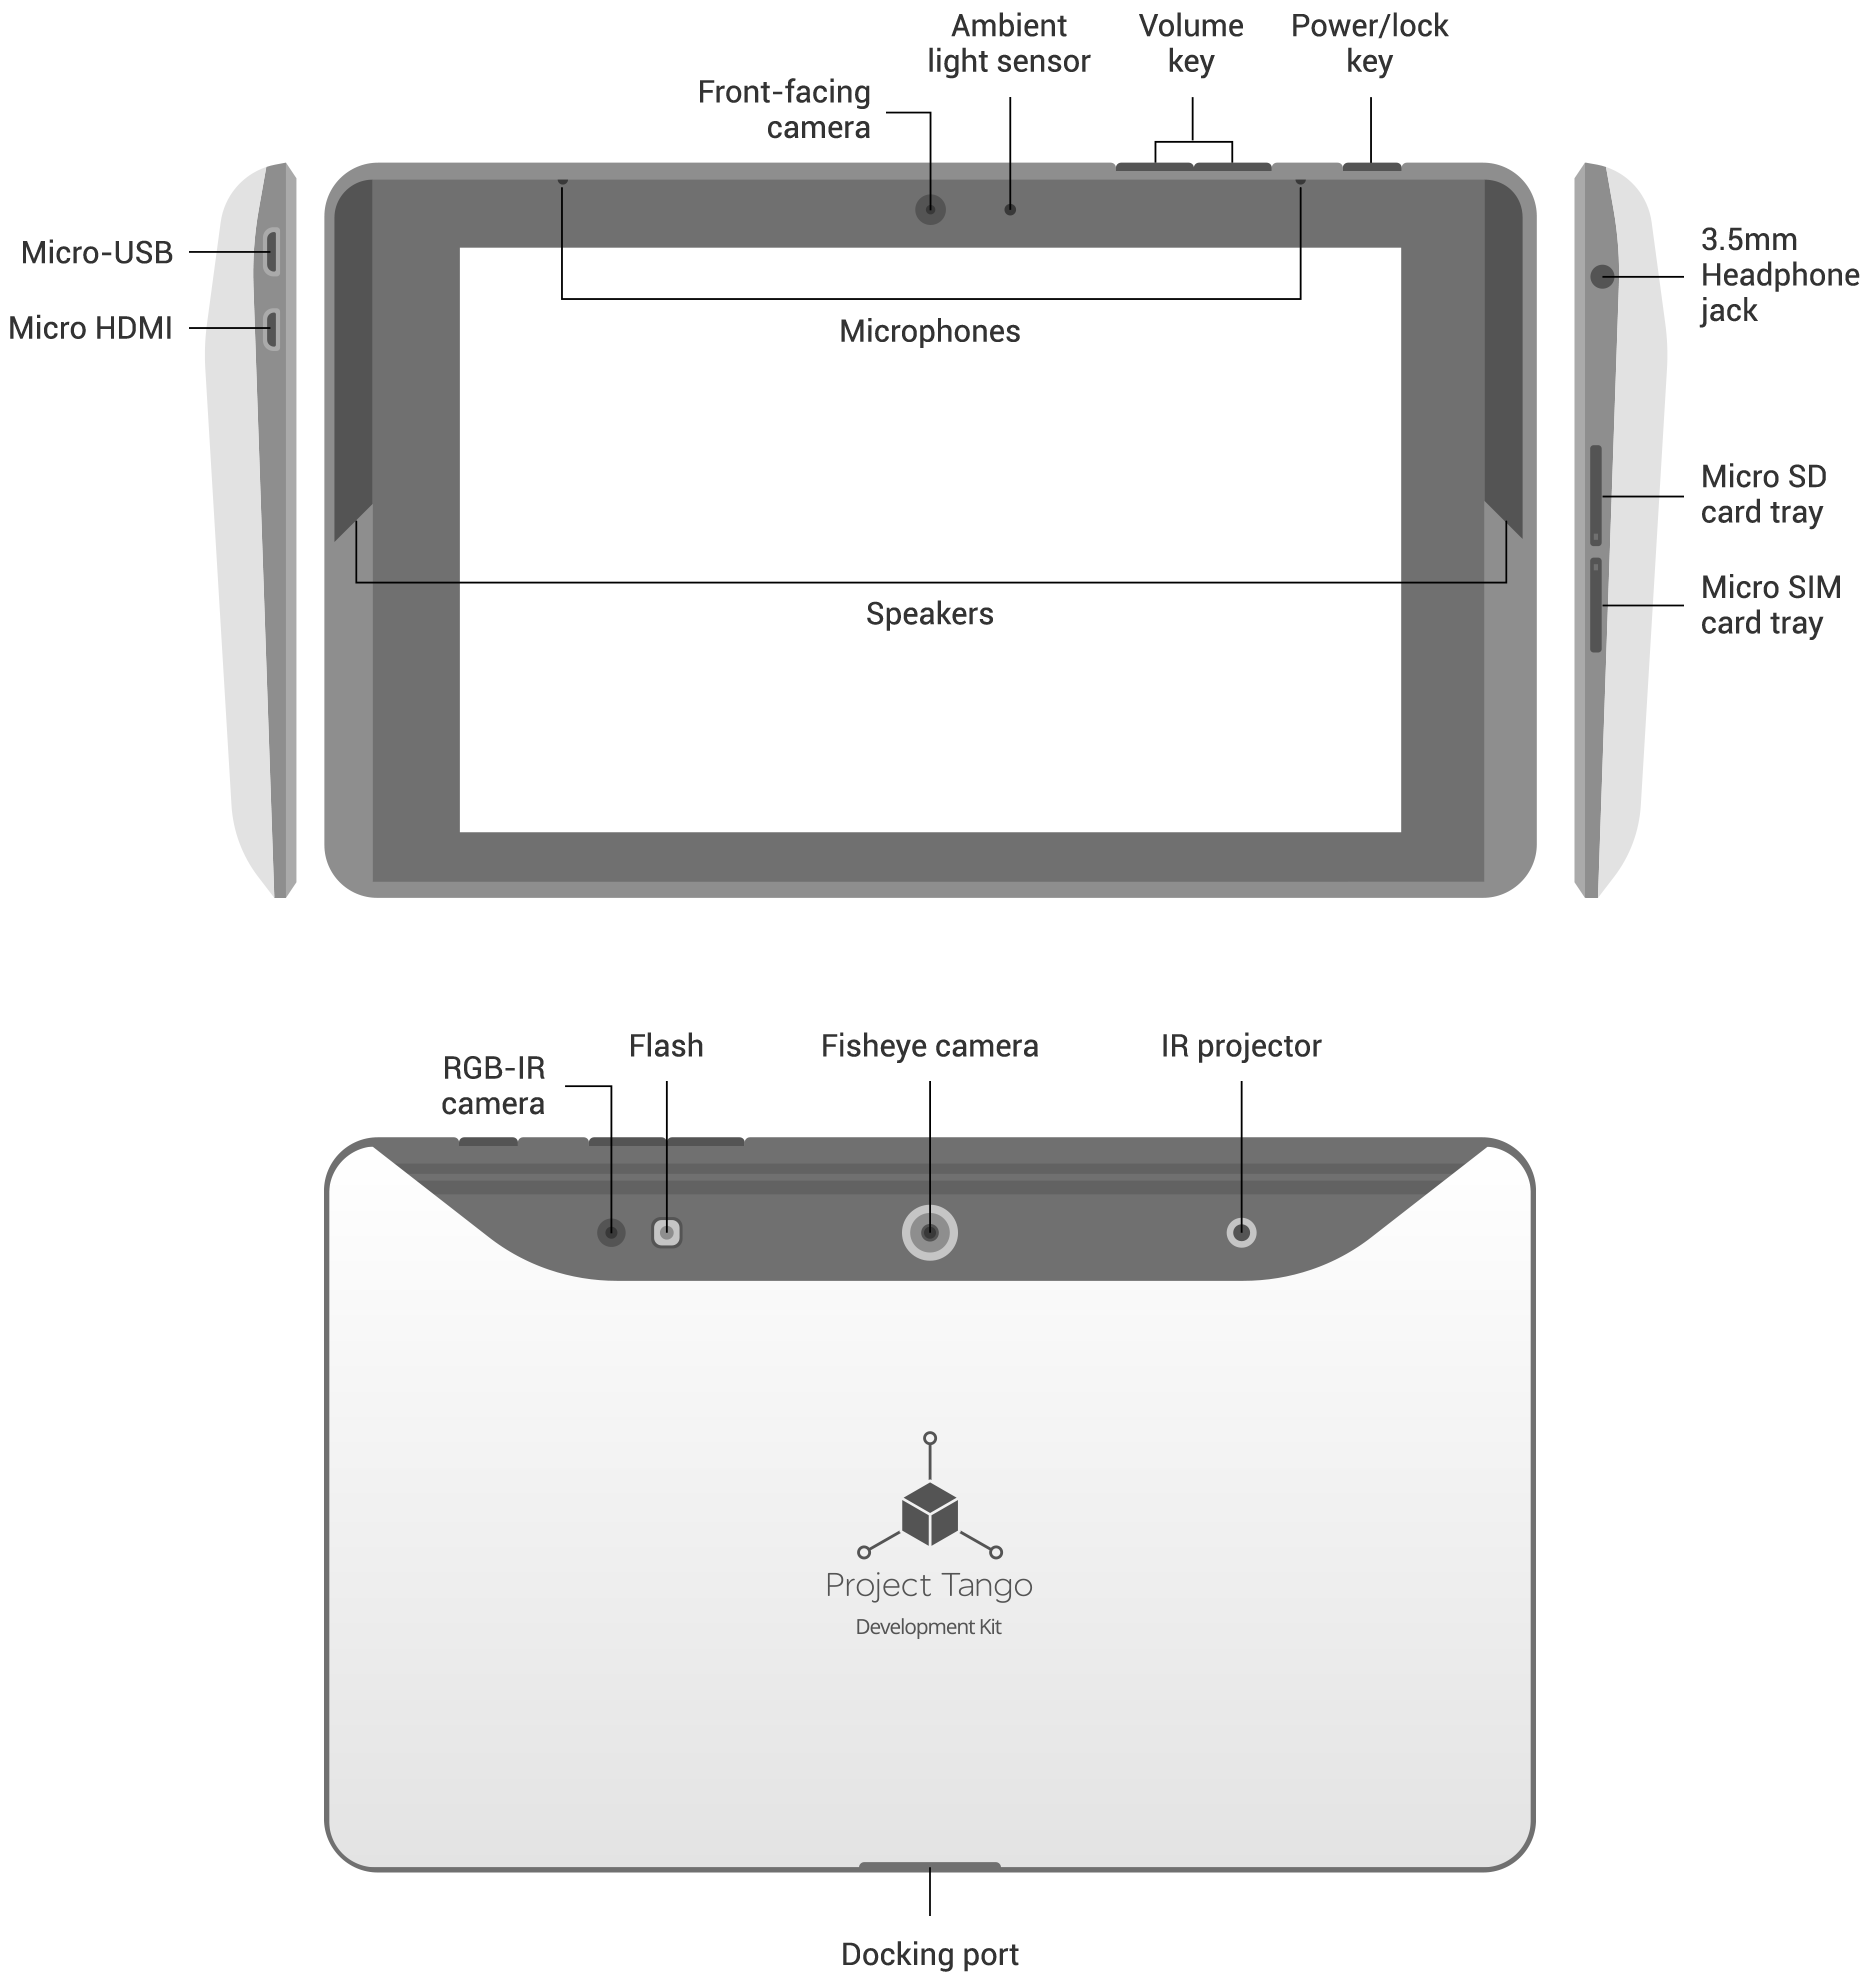 The locations of various hardware features on the Project Tango Tablet
          Development Kit.

         Front: Front-facing camera, Microphone, Speakers, Touch screen,
         Power/lock key, Volume key, 3.5mm headset jack, microSD card tray,
         Nano SIM card tray, Micro-USB port, Micro HDMI port

         Back: Rear-facing RGB-IR camera, Visible light flash, IR light flash,
         Fisheye camera, IR projector, Docking port for charging and USB 3.0
         host